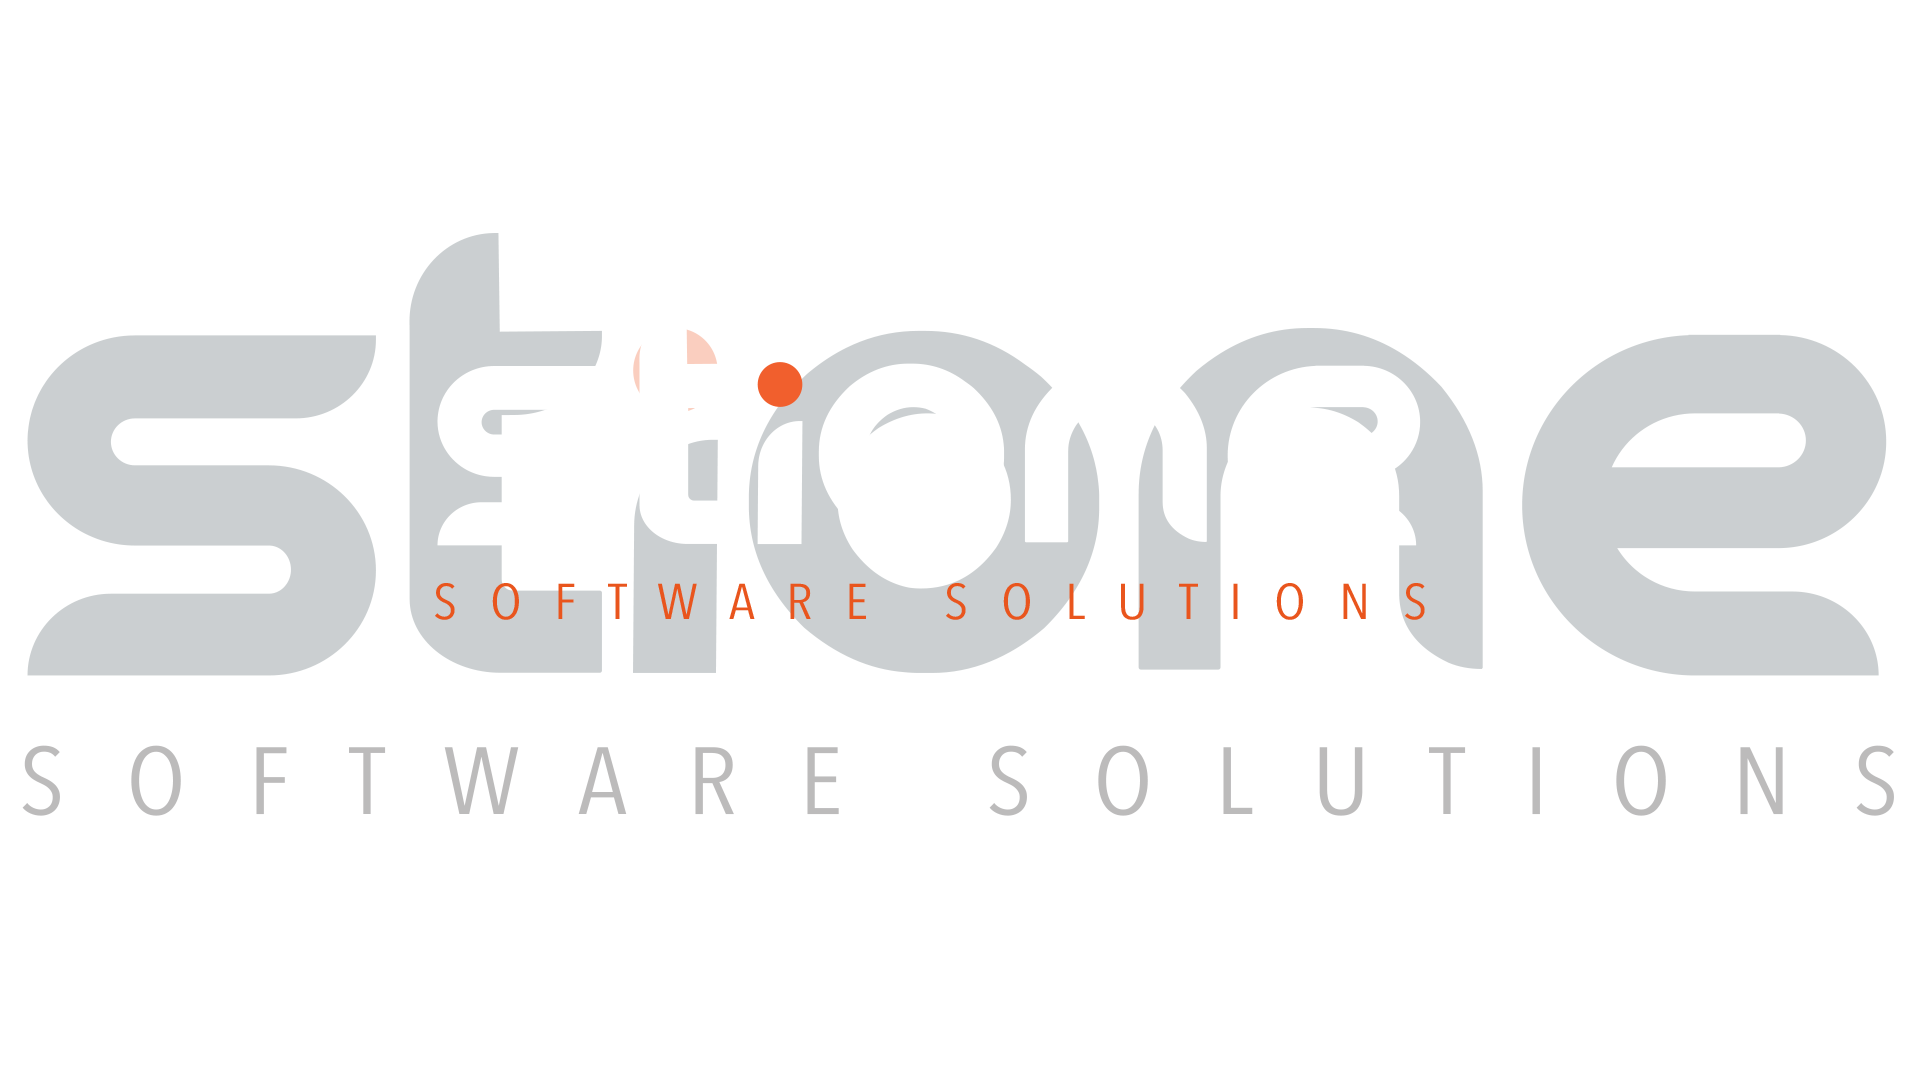 Stione Software Solutions